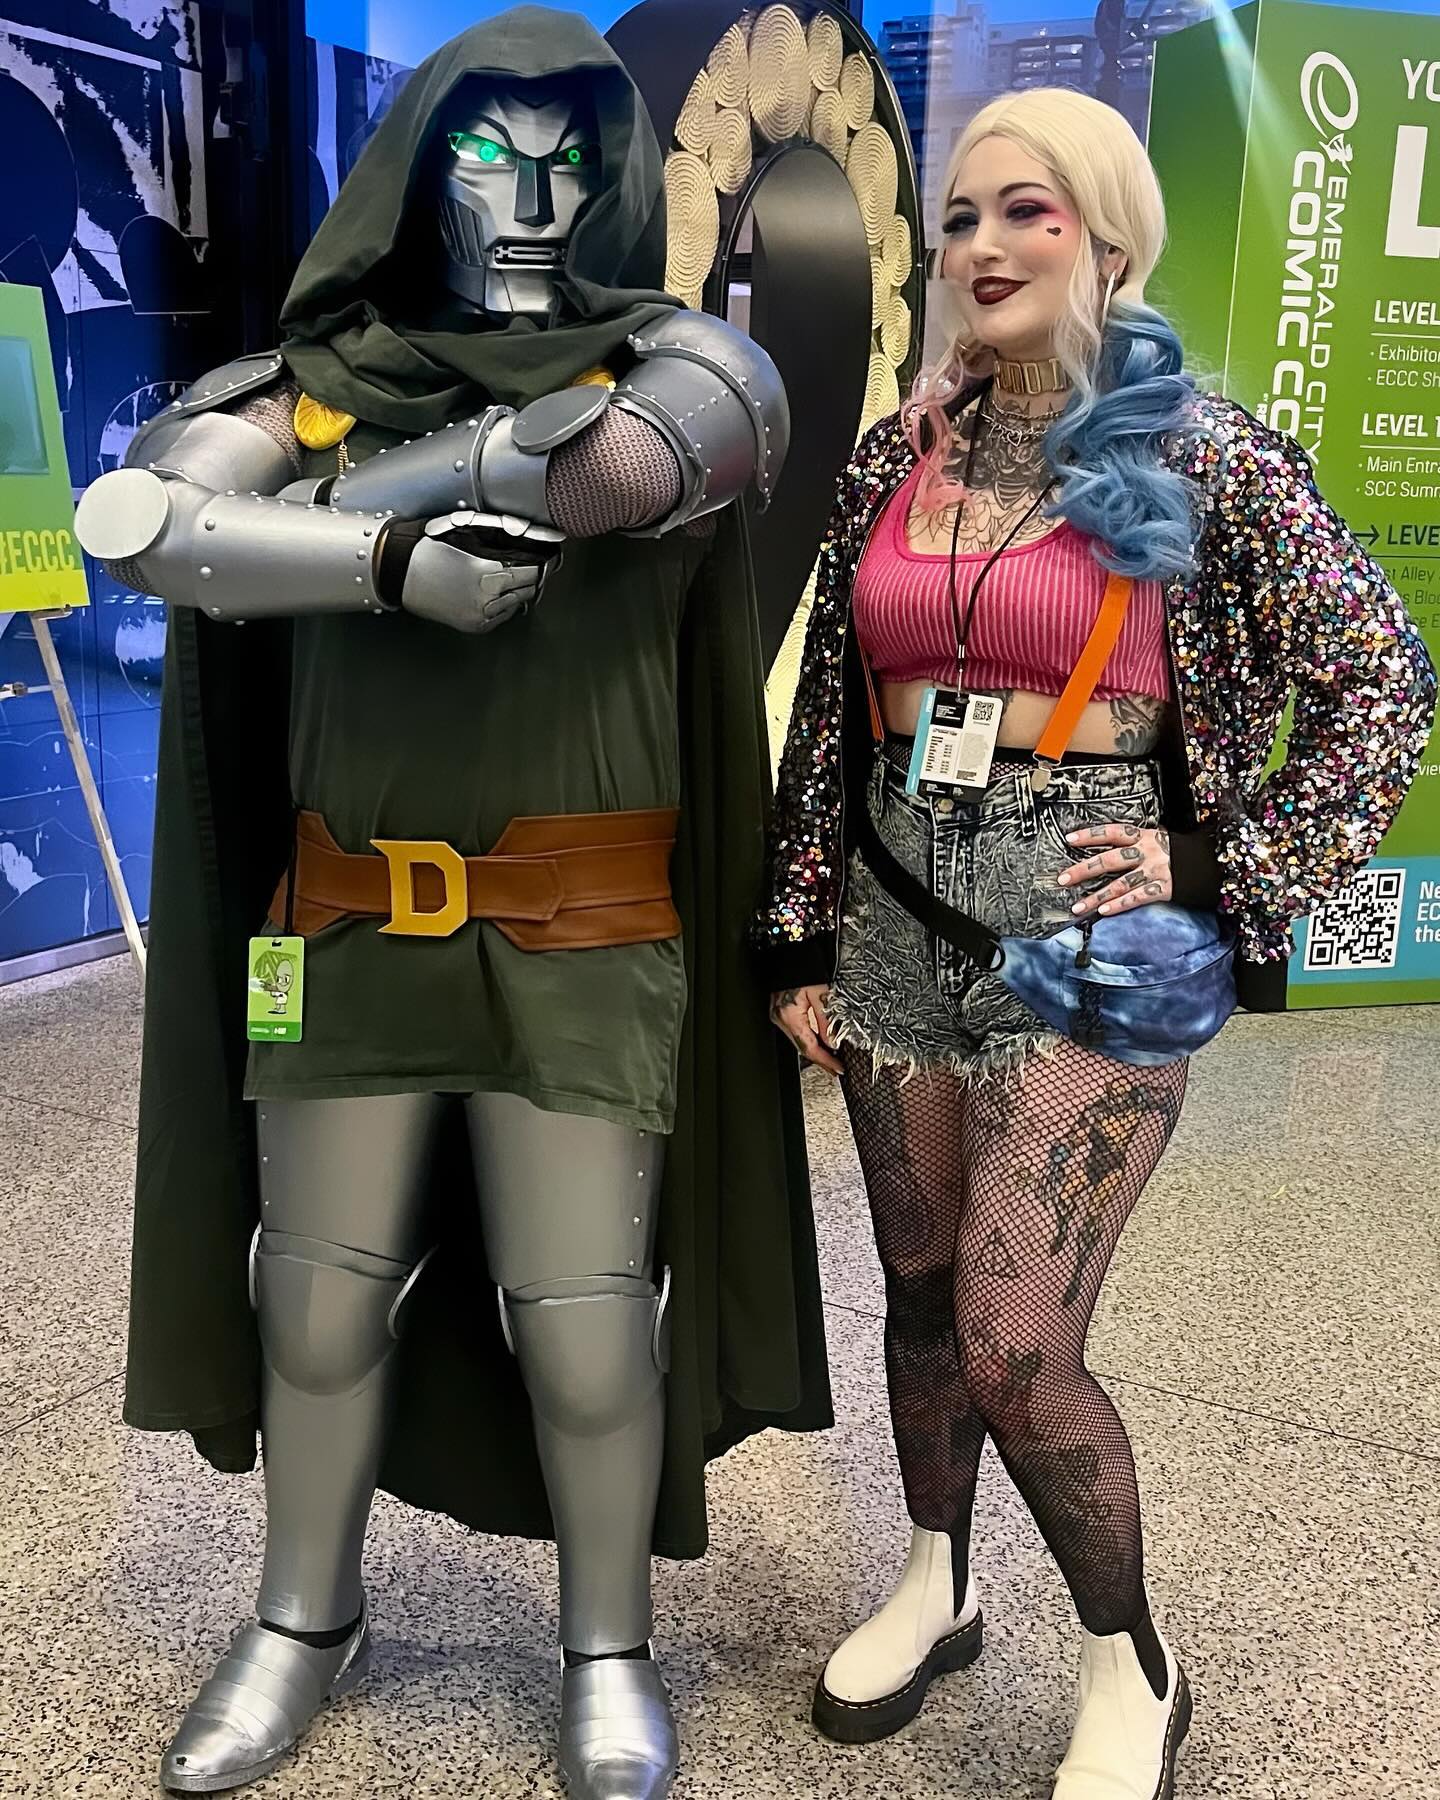 Comicon was super fun! 🤩 and I really enjoyed cosplaying as Harley Quinn for the first time 💕 might have to do it again 🤪

Also look how cute me and @batman.in.seattle  are ❤️‍🔥